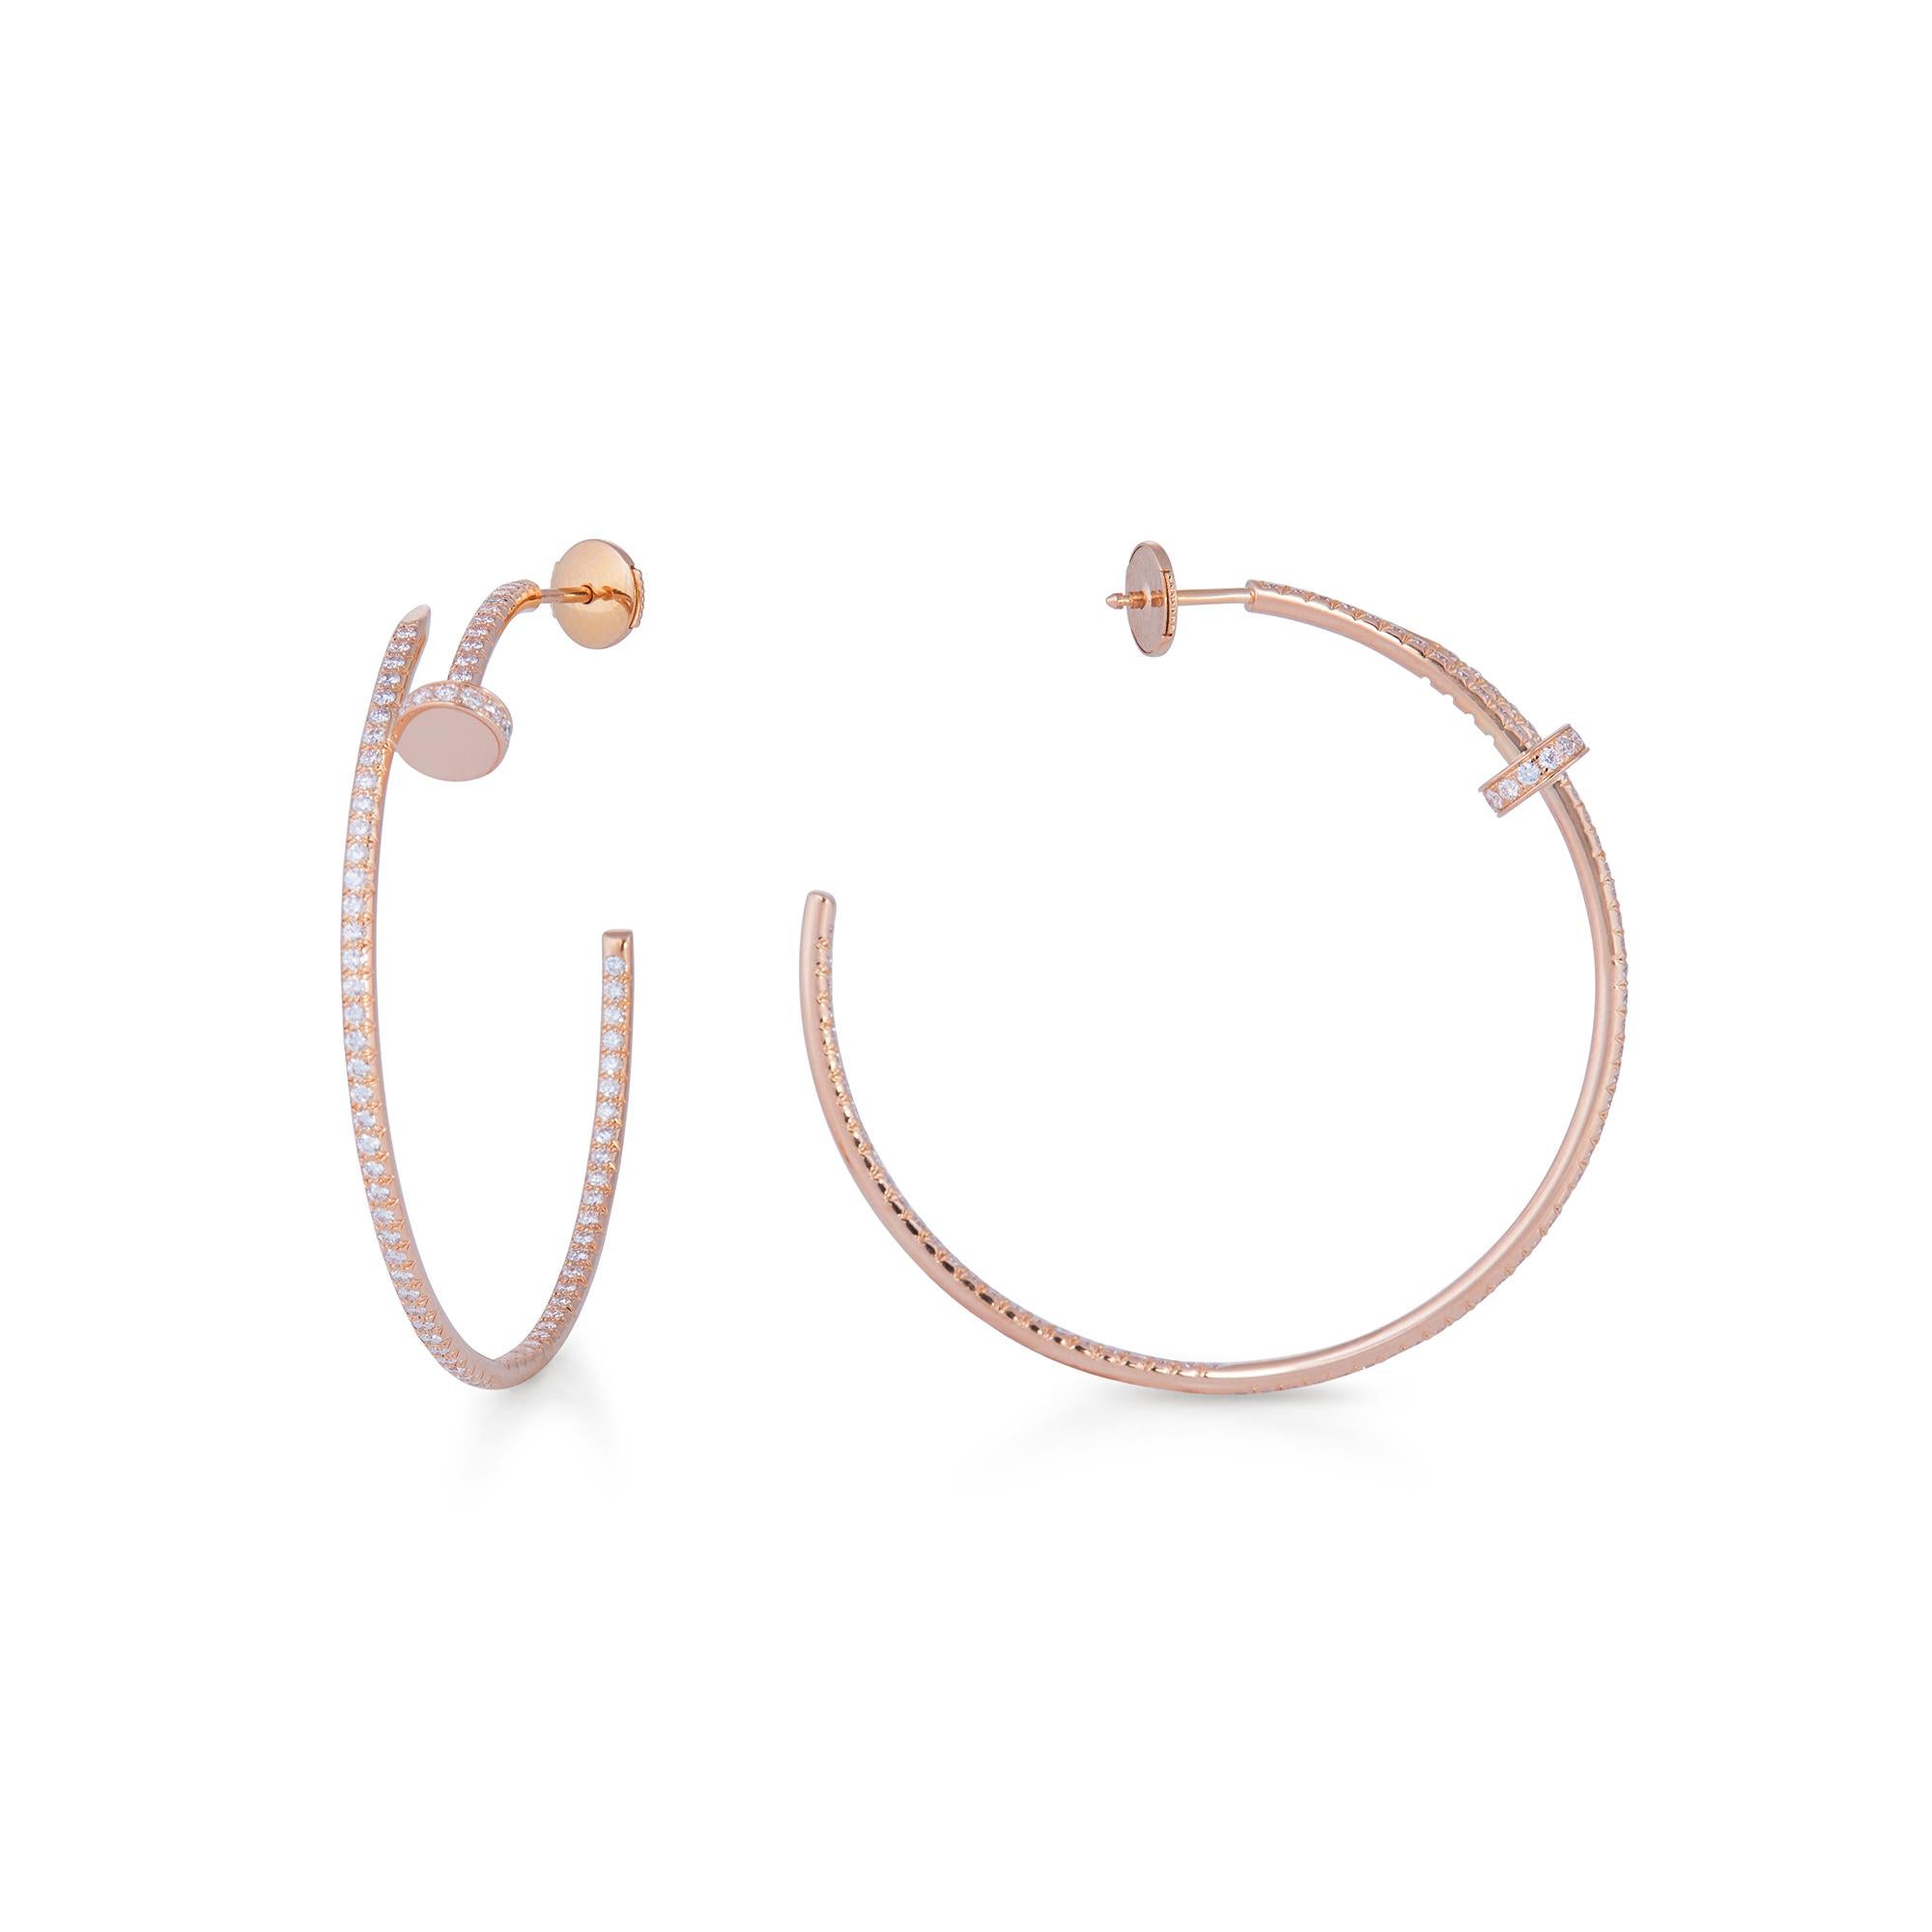 Authentic Cartier Juste Un Clou earrings crafted in 18 karat rose gold features the iconic Cartier nail motif taking the shape of hoop earrings. The earrings are set with 176 round brilliant cut diamonds for an estimated 1.25 total carat weight.